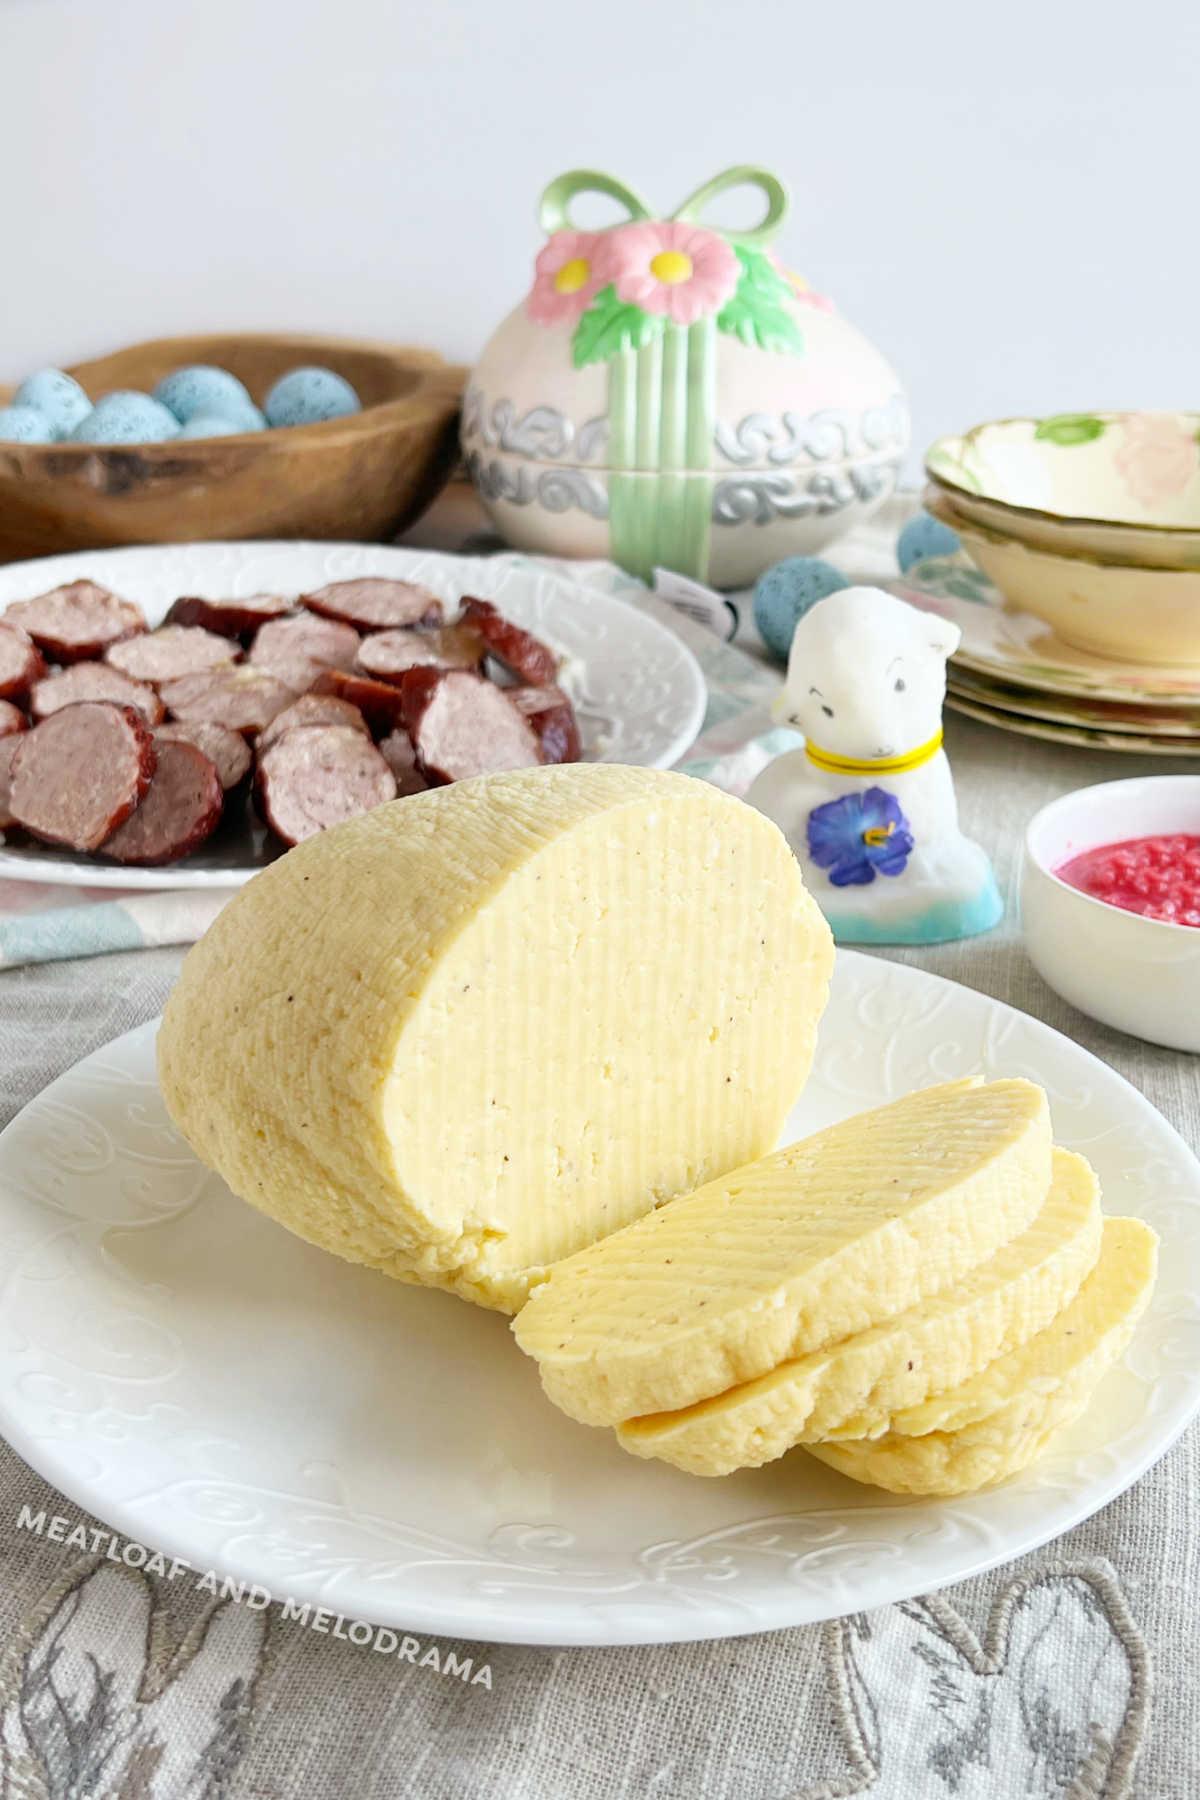 slovak easter cheese (cirac) with kolbassa and beet horseradish on the table